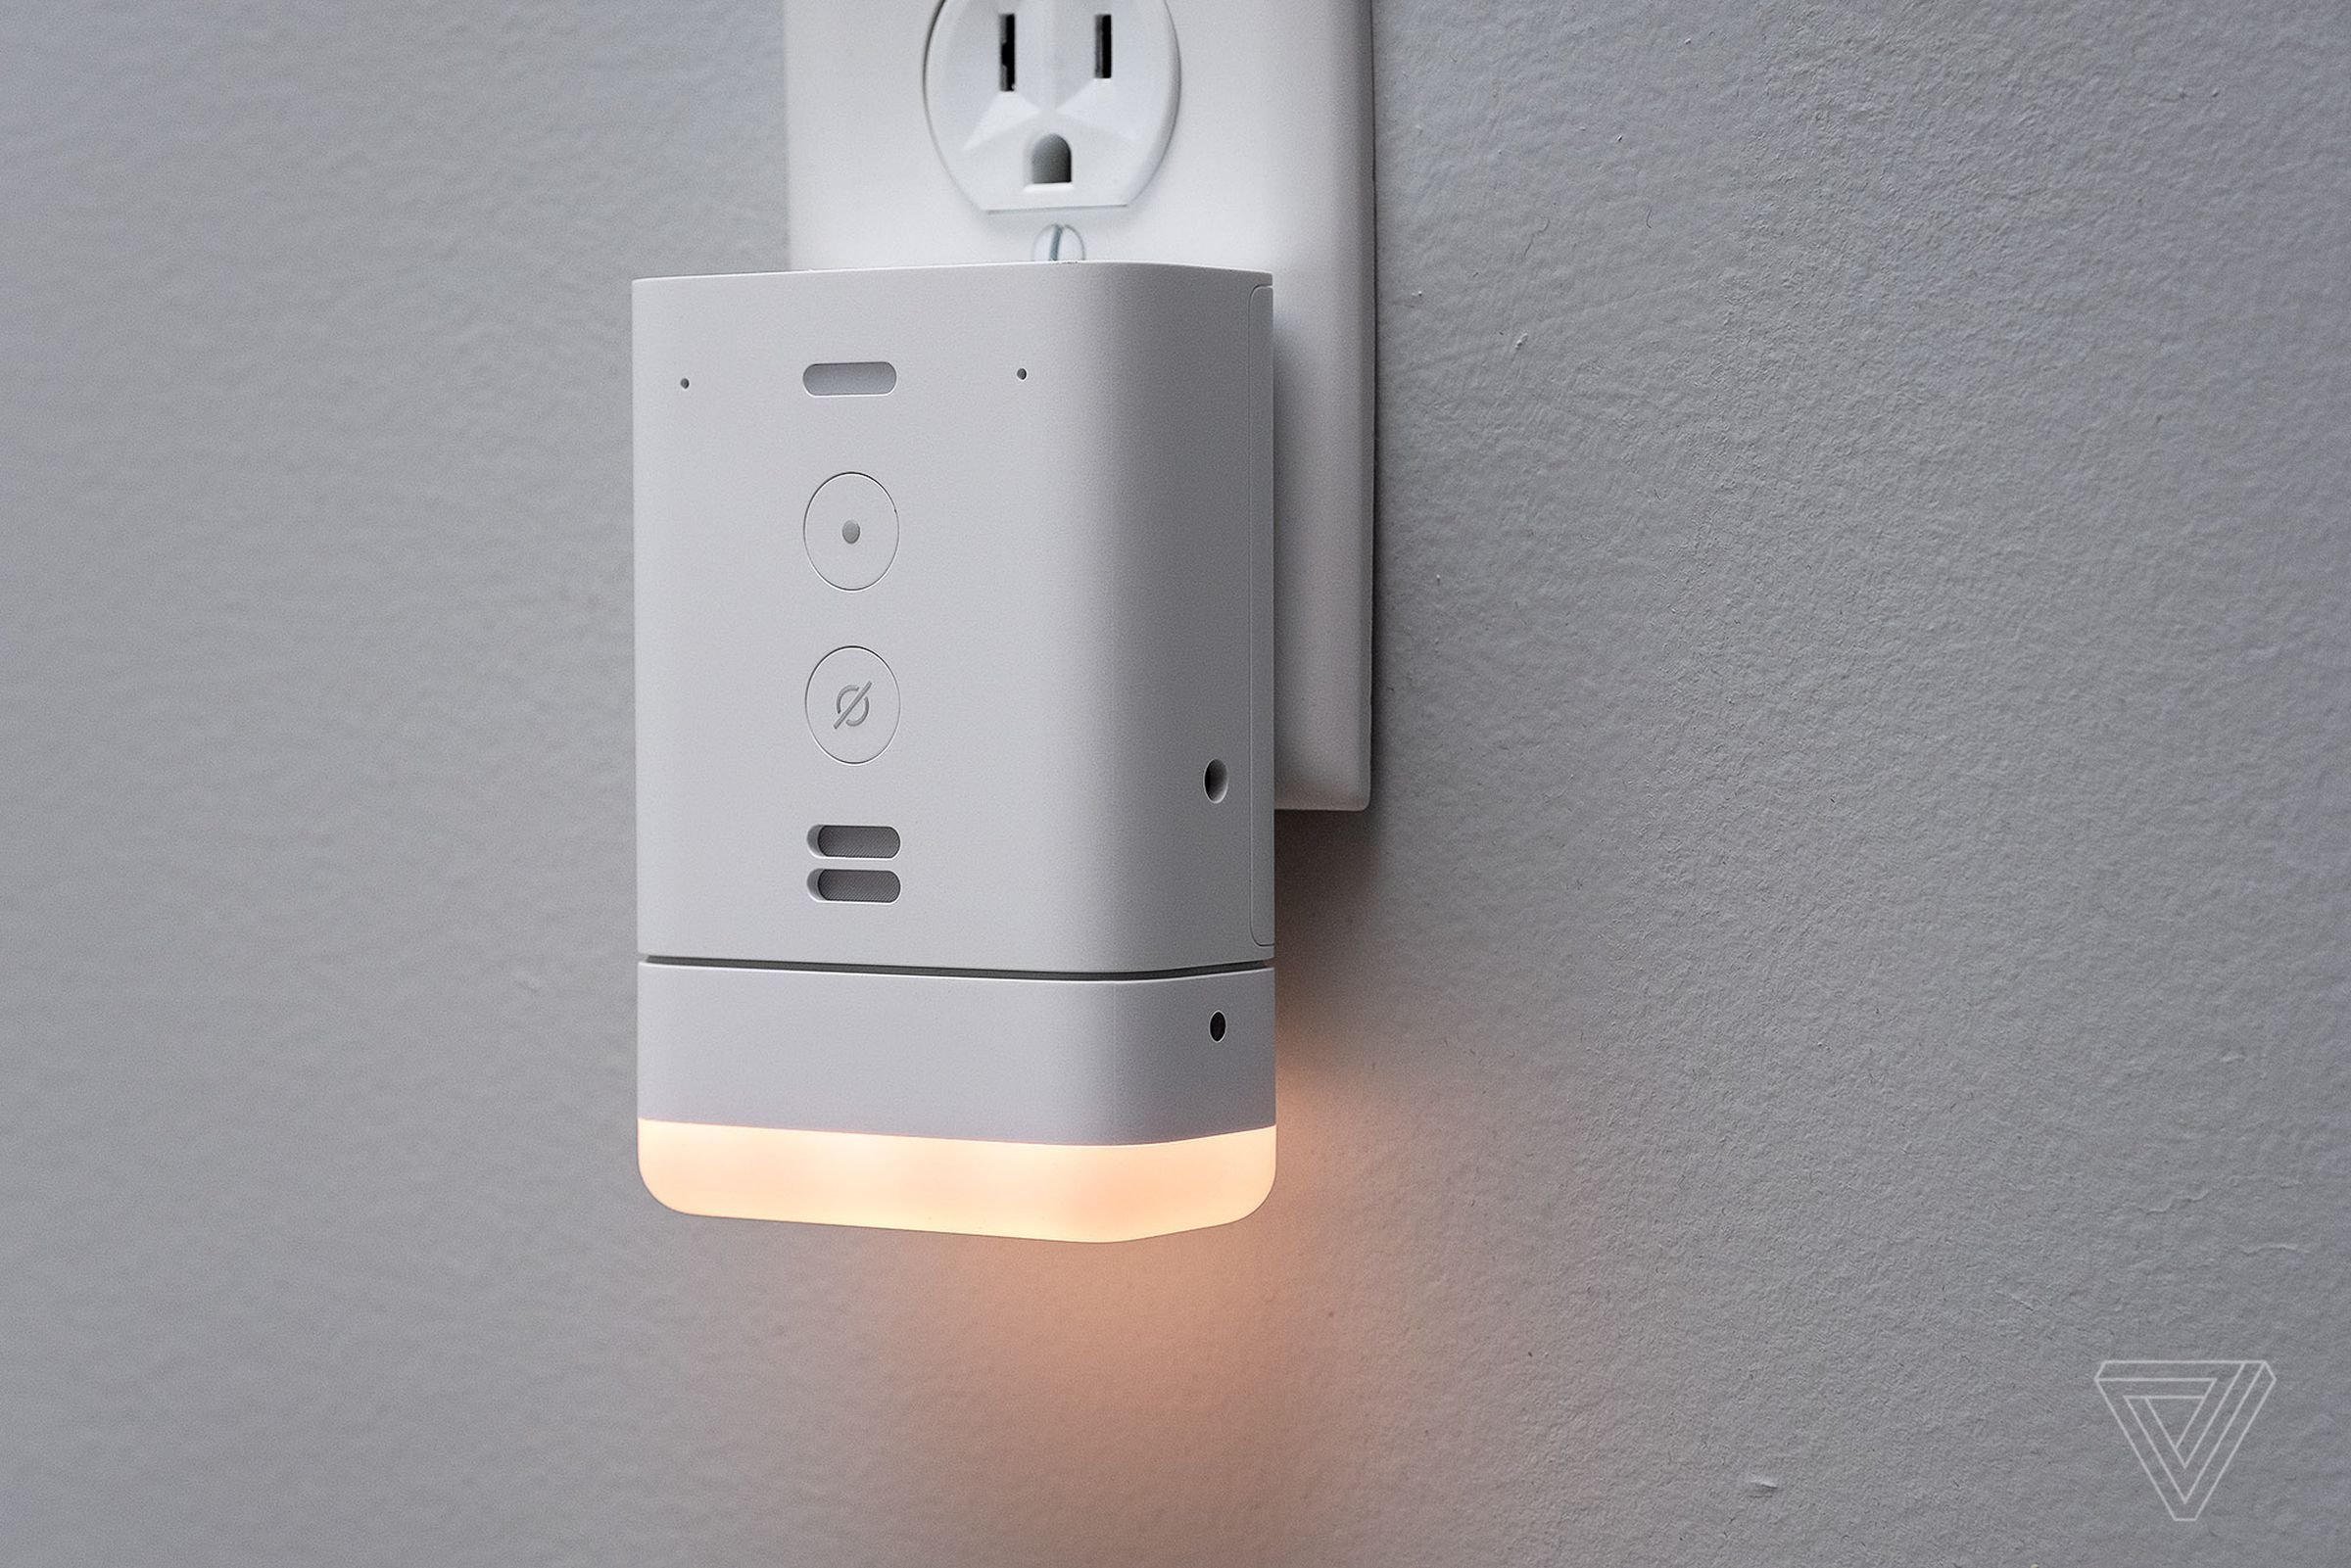 The Echo Flex has a USB port on the bottom that can charge a phone or power add-on modules, such as a night light. It can also plug into larger speakers via a 3.5mm cable.